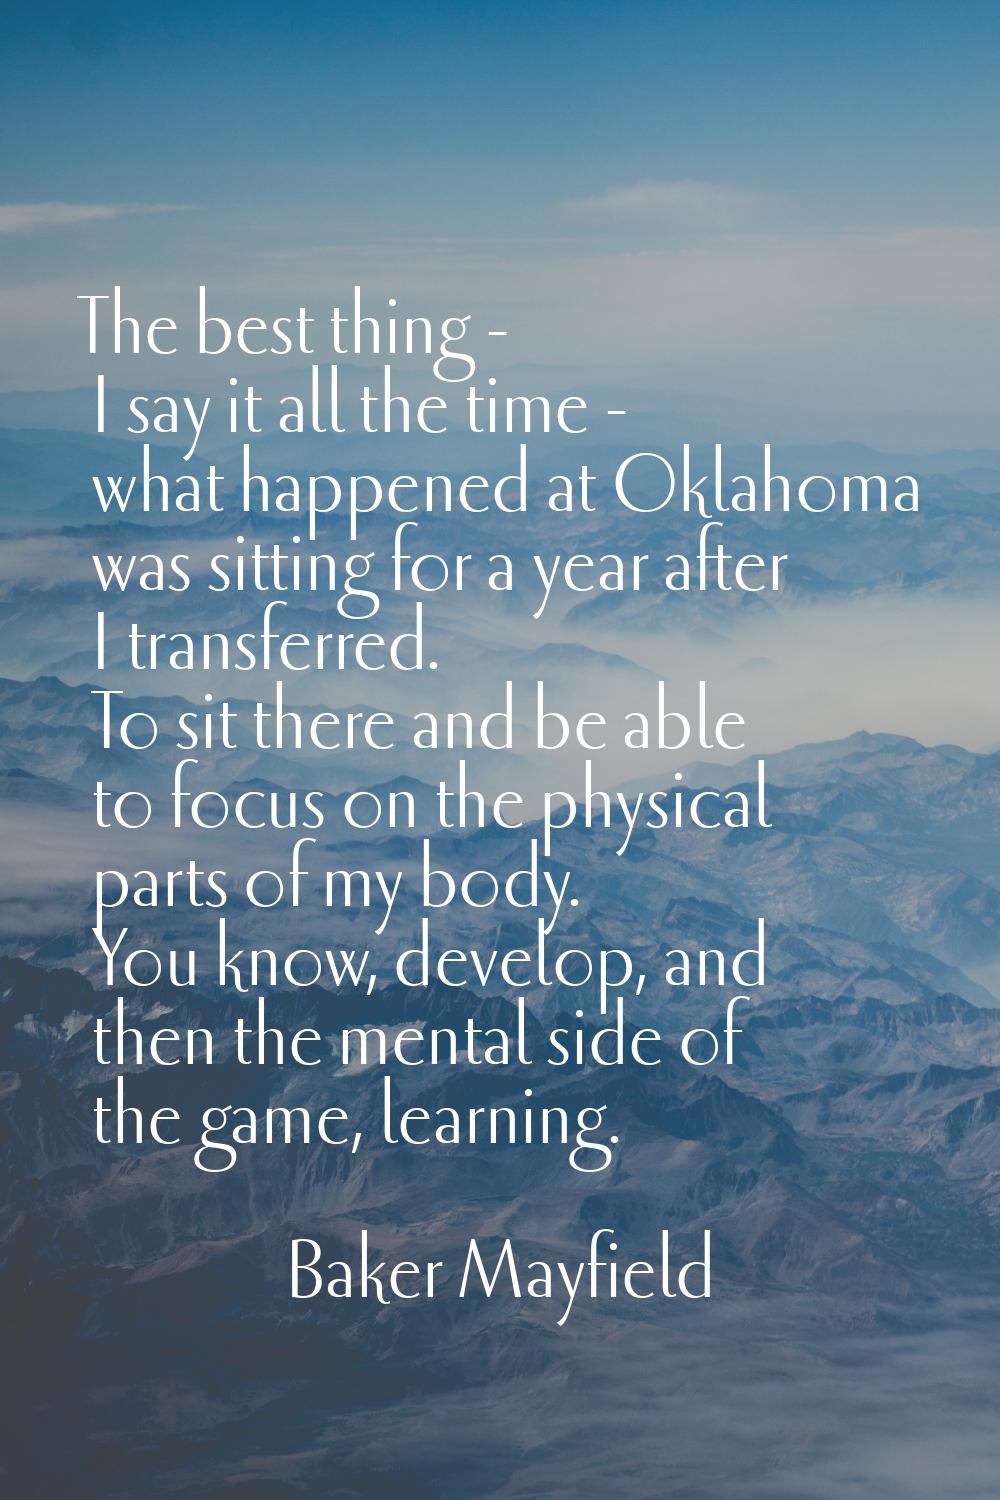 The best thing - I say it all the time - what happened at Oklahoma was sitting for a year after I t